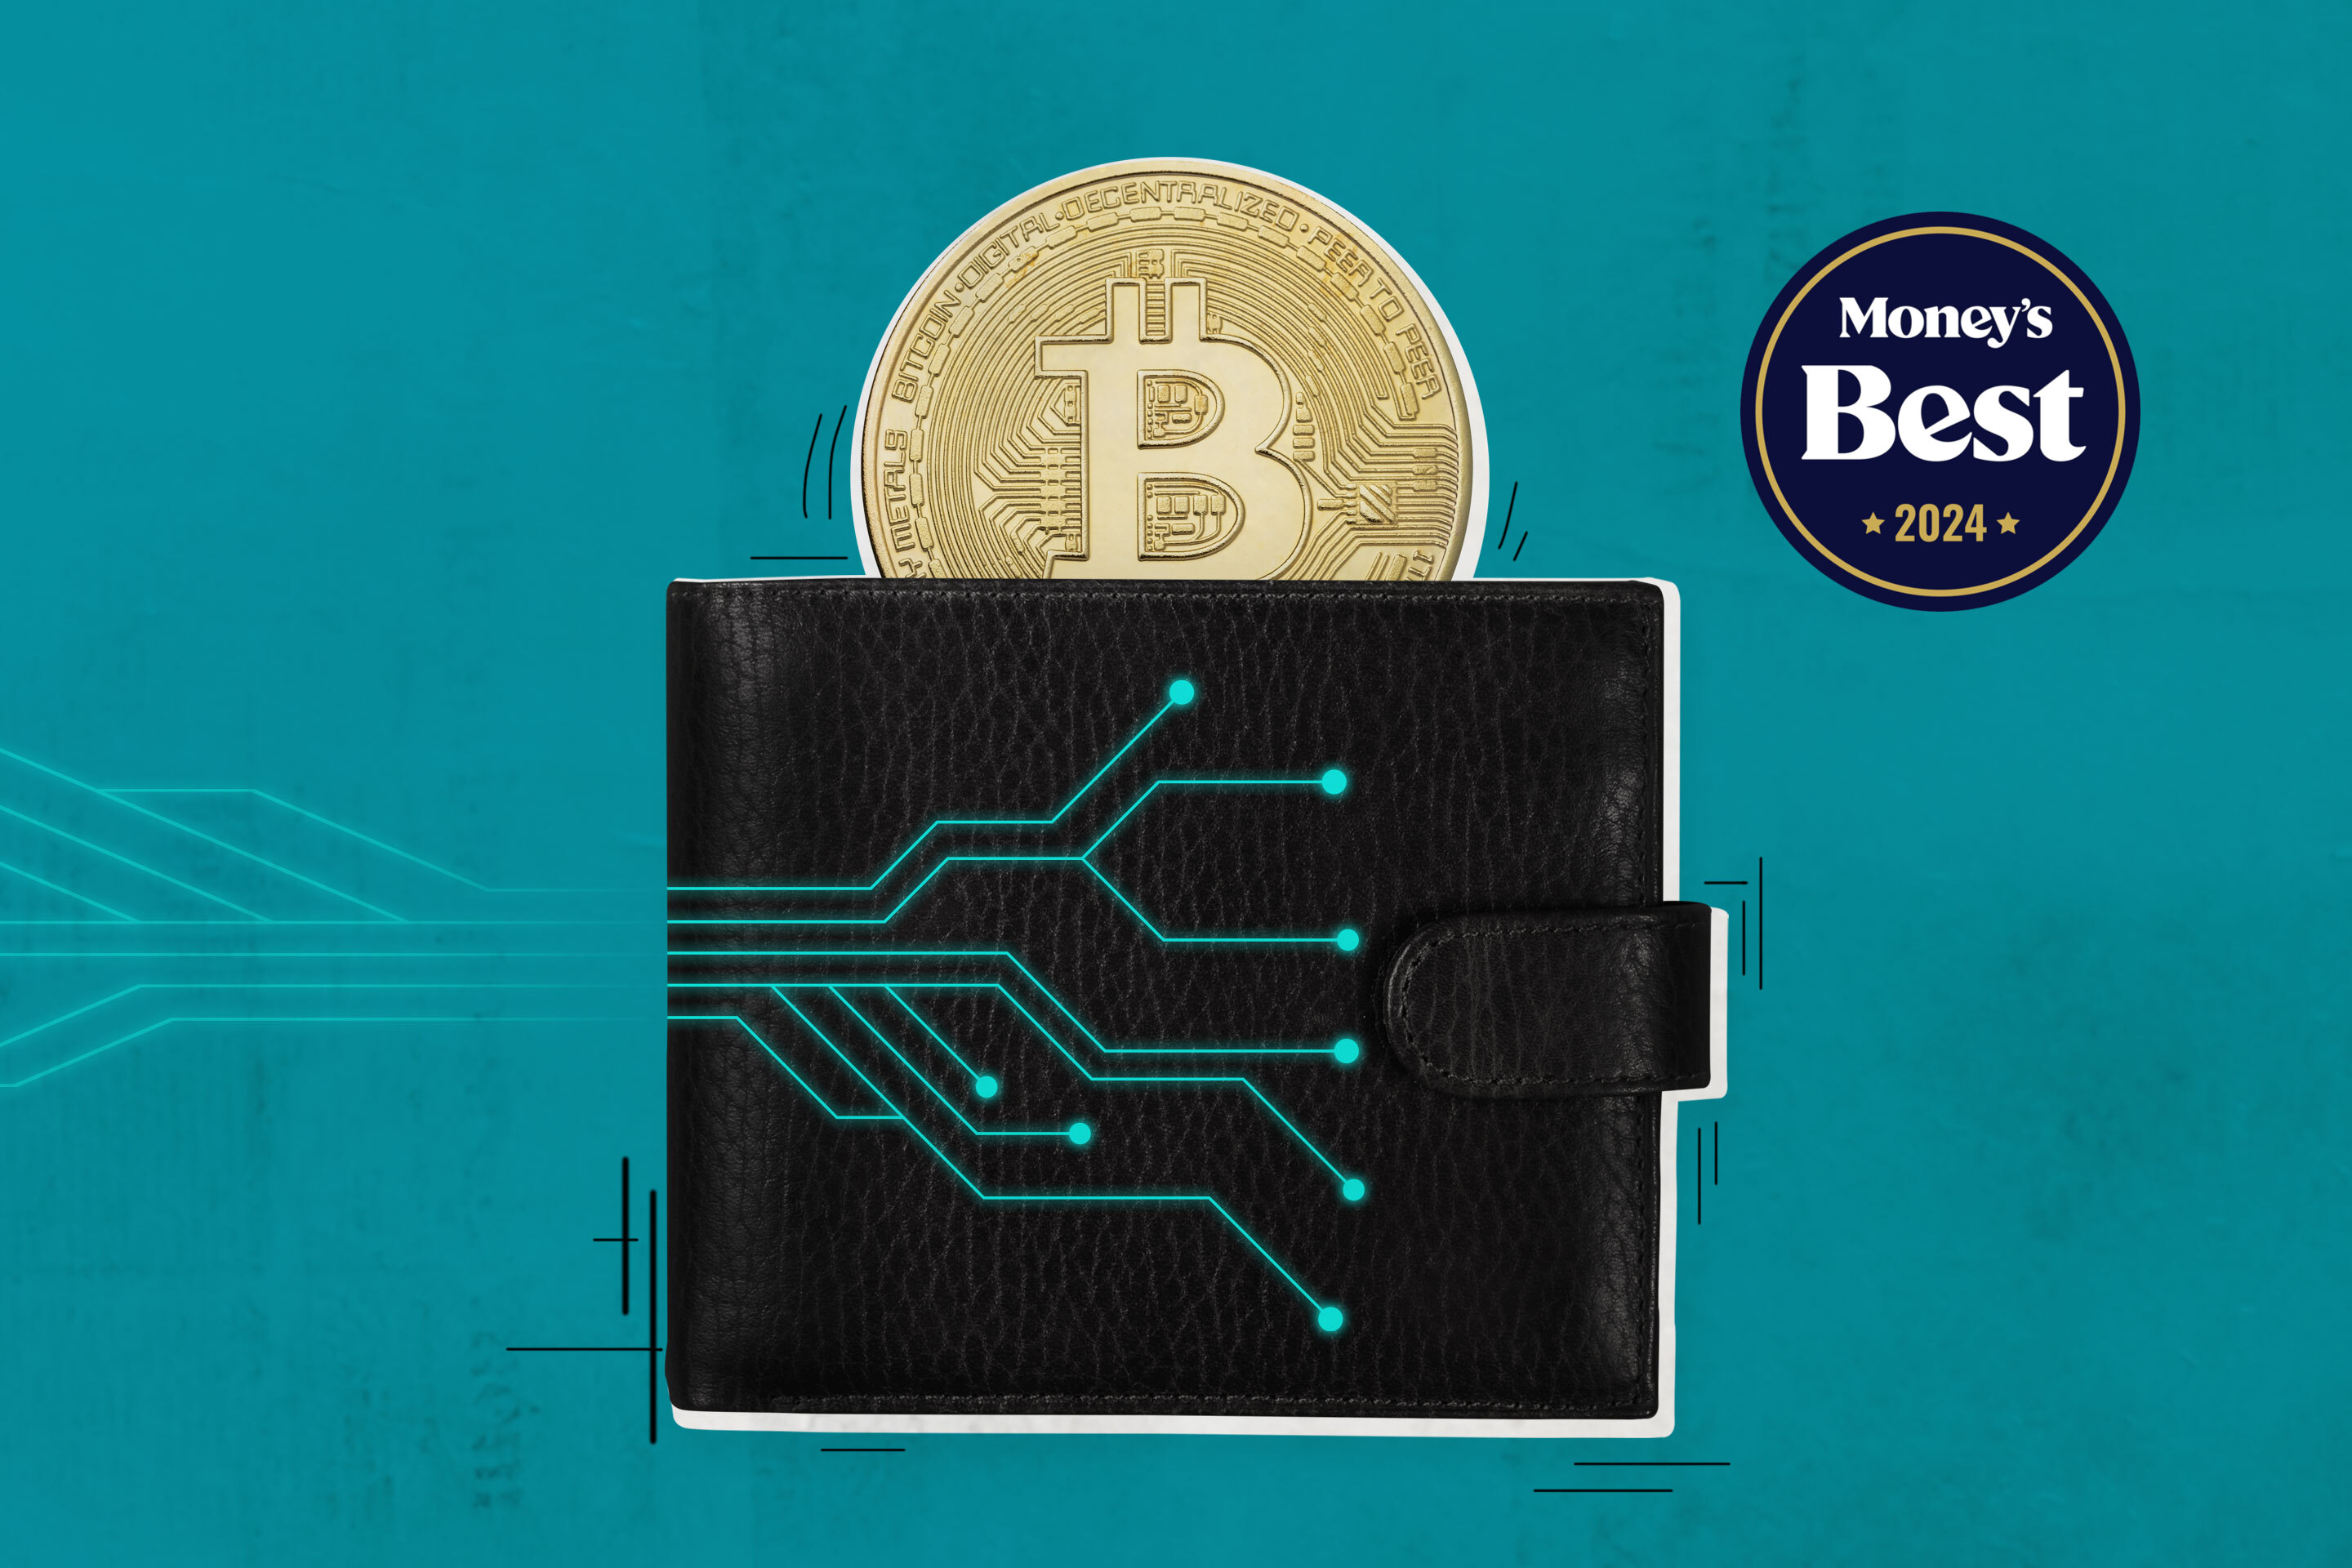 Best Cryptocurrency Software Wallets of 